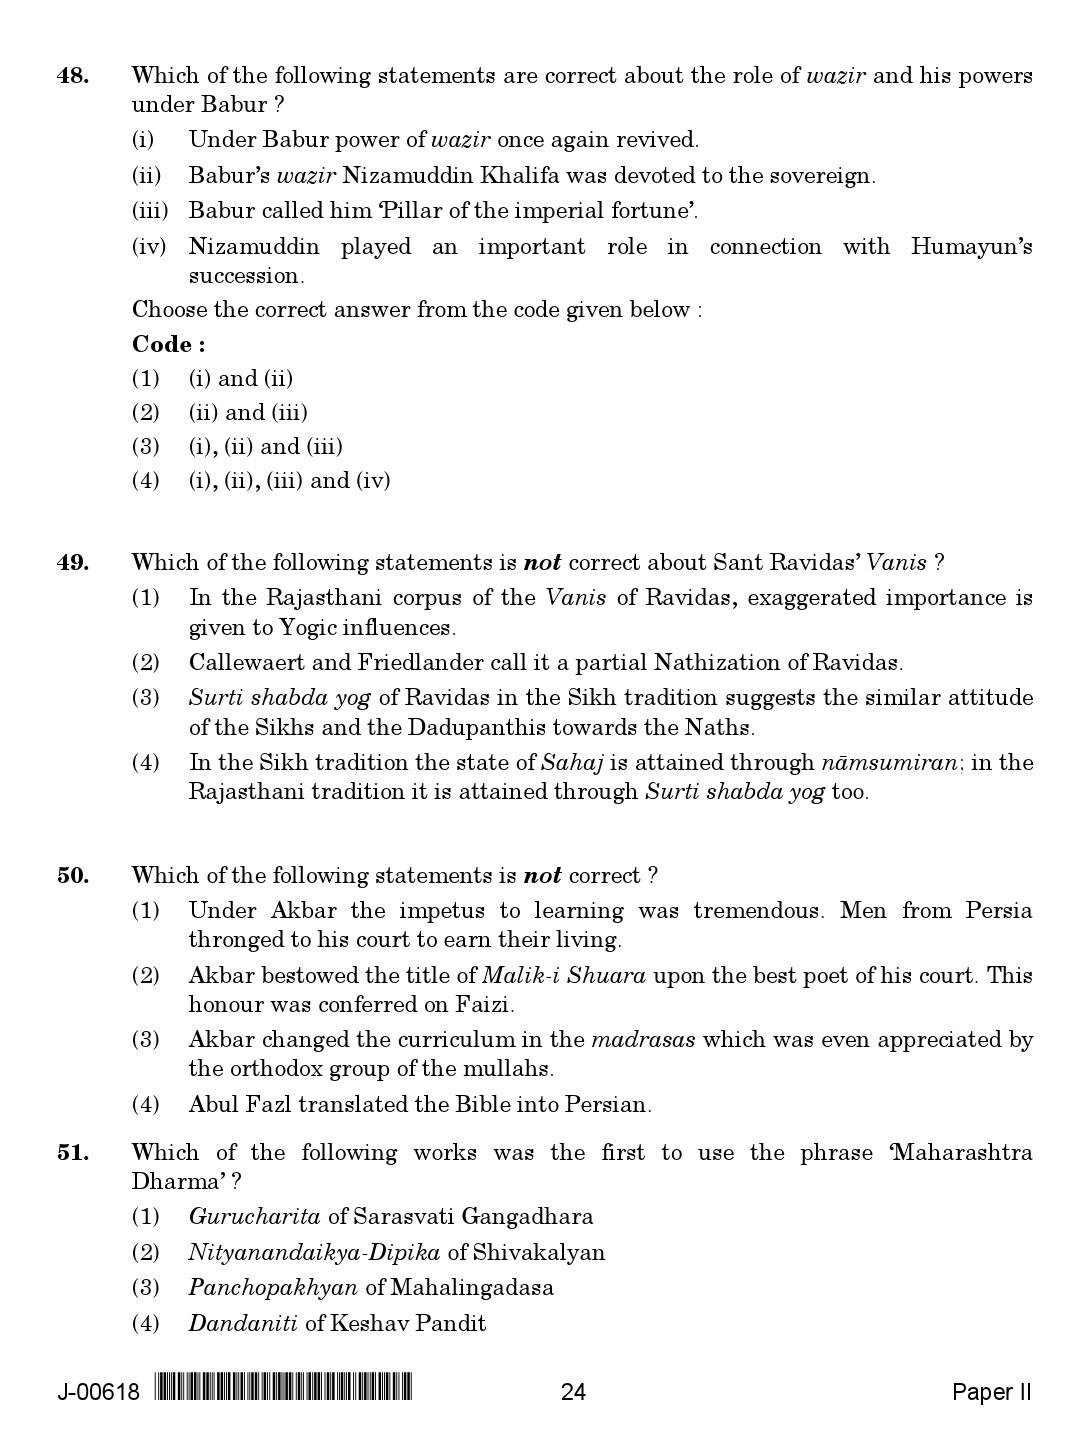 History Question Paper II July 2018 in English 2nd Exam 13